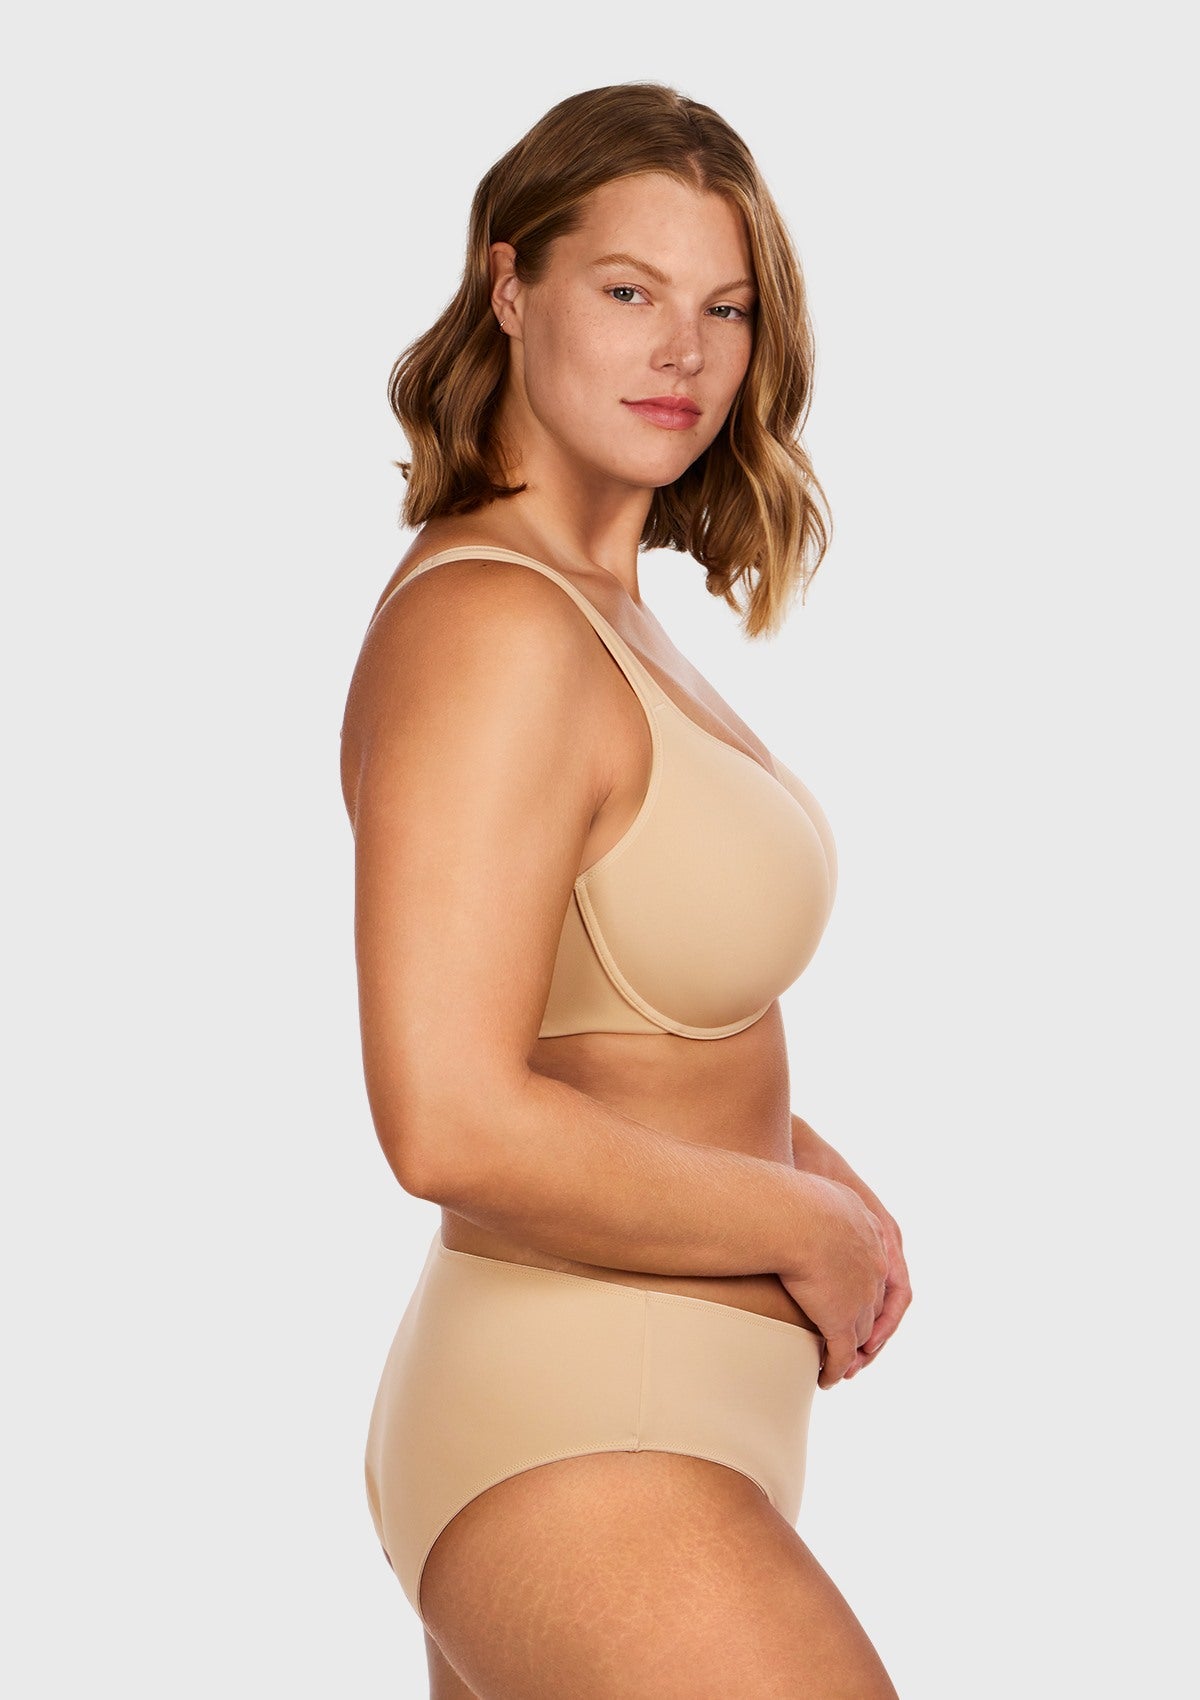 HSIA Patricia Seamless Lightly Padded Minimizer Bra -for Bigger Busts - Beige / 34 / DD/E